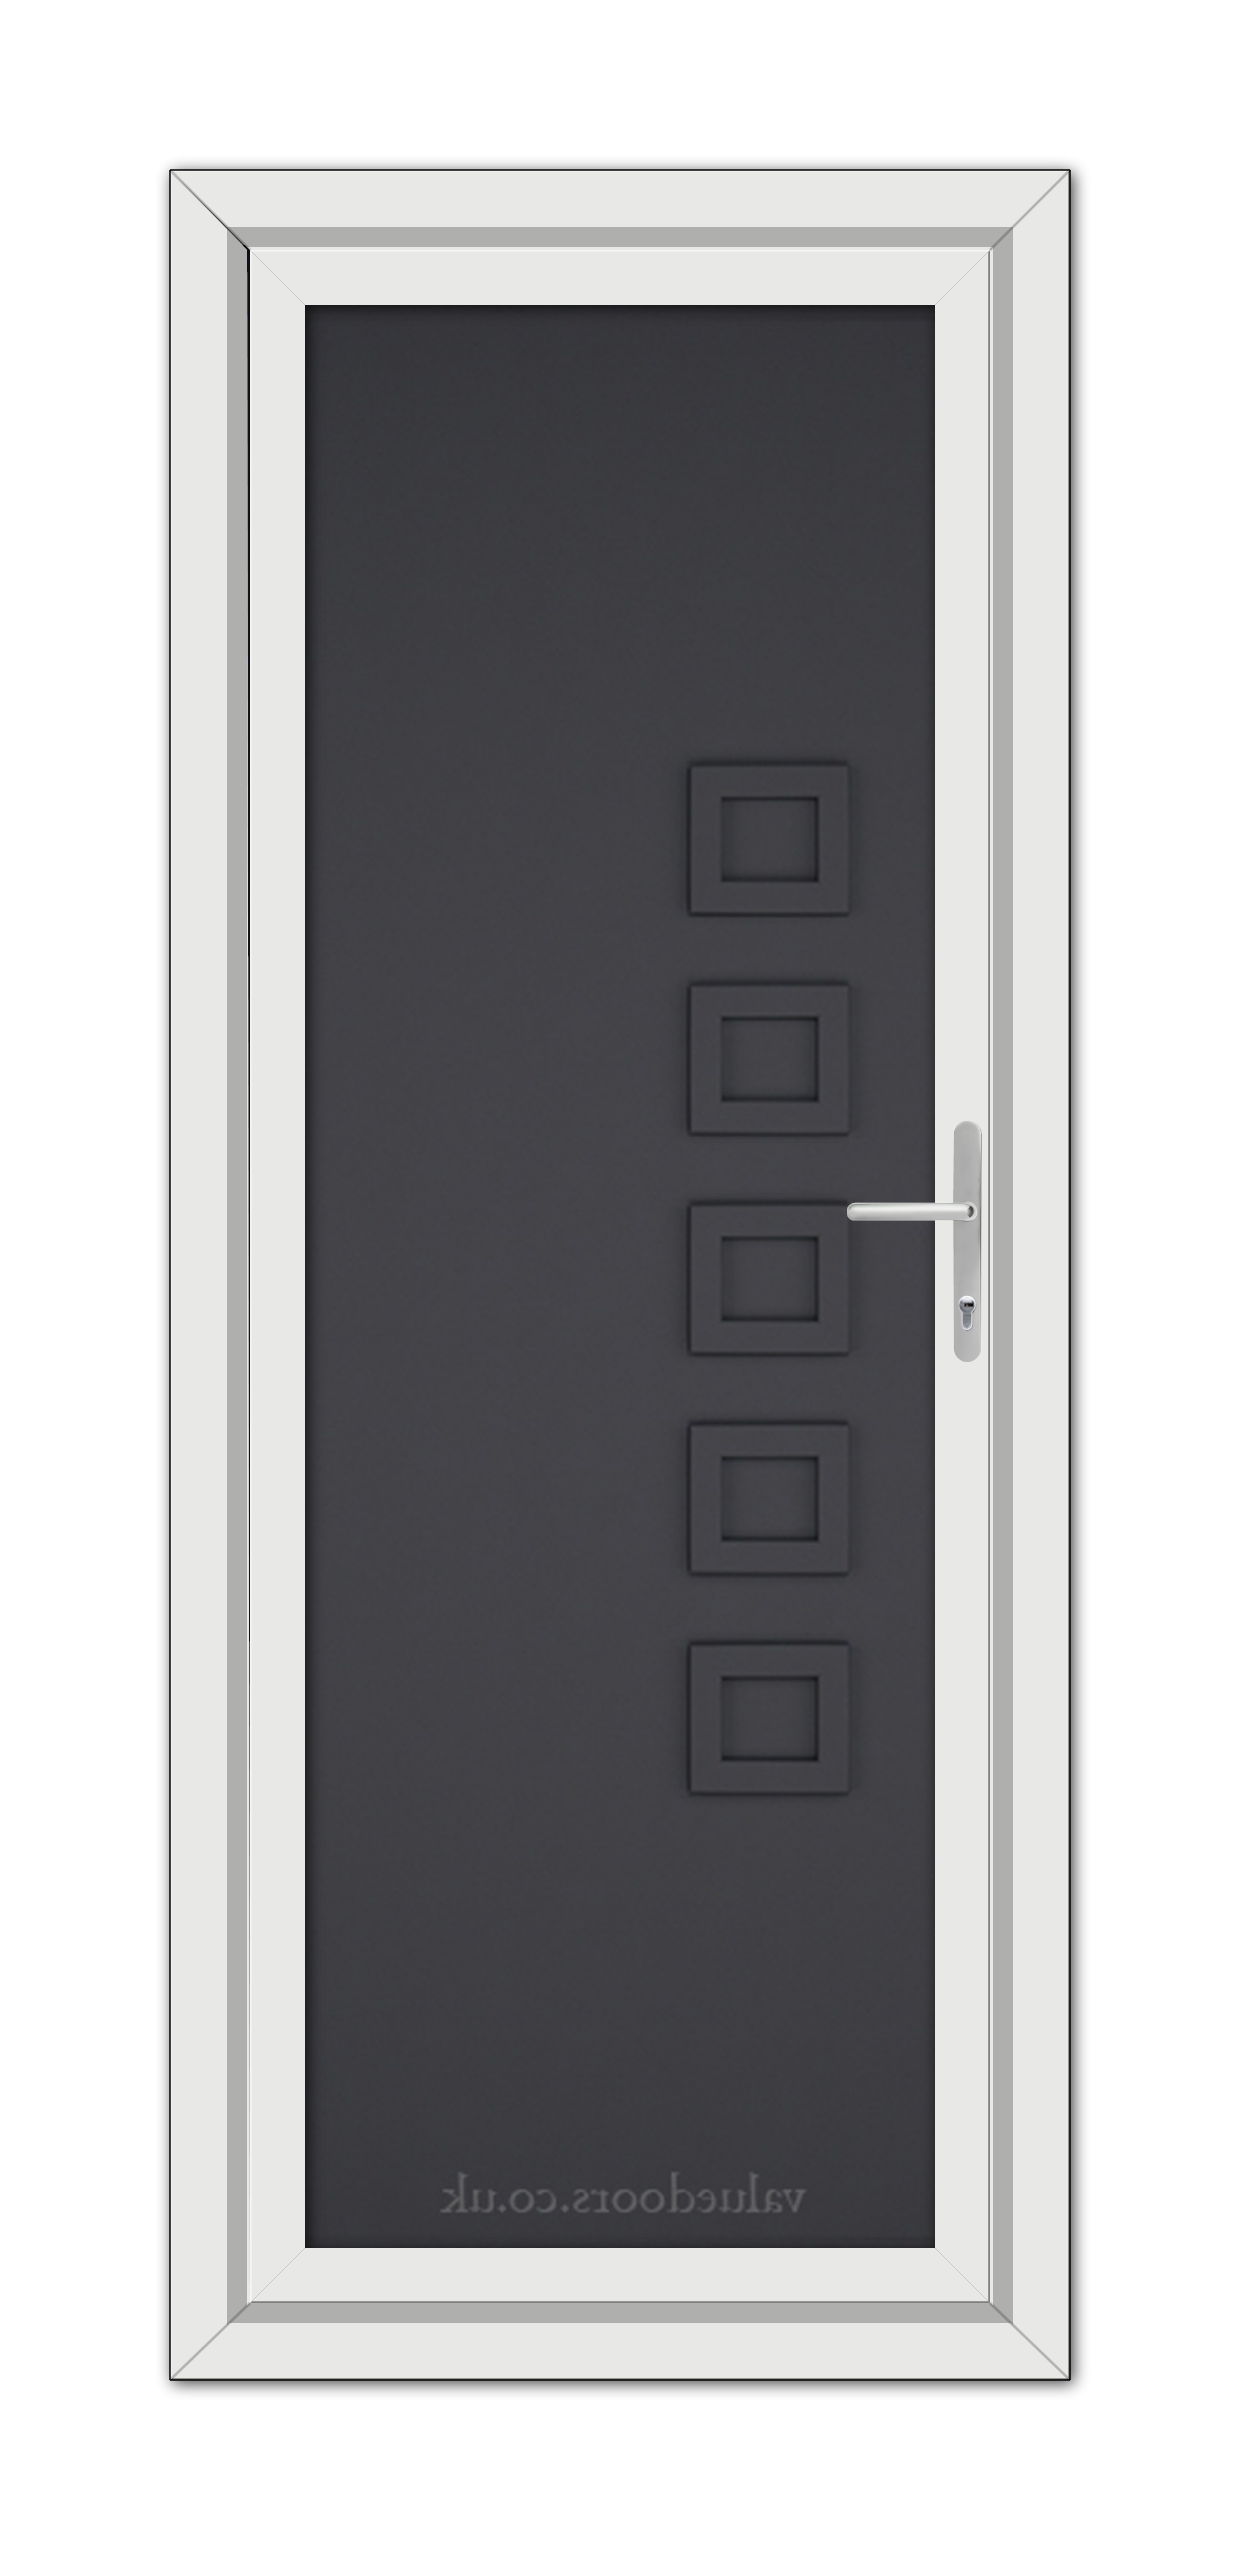 A modern Grey Malaga Solid uPVC Door with a straight handle and four square windows on the left, viewable vertically in a white frame.